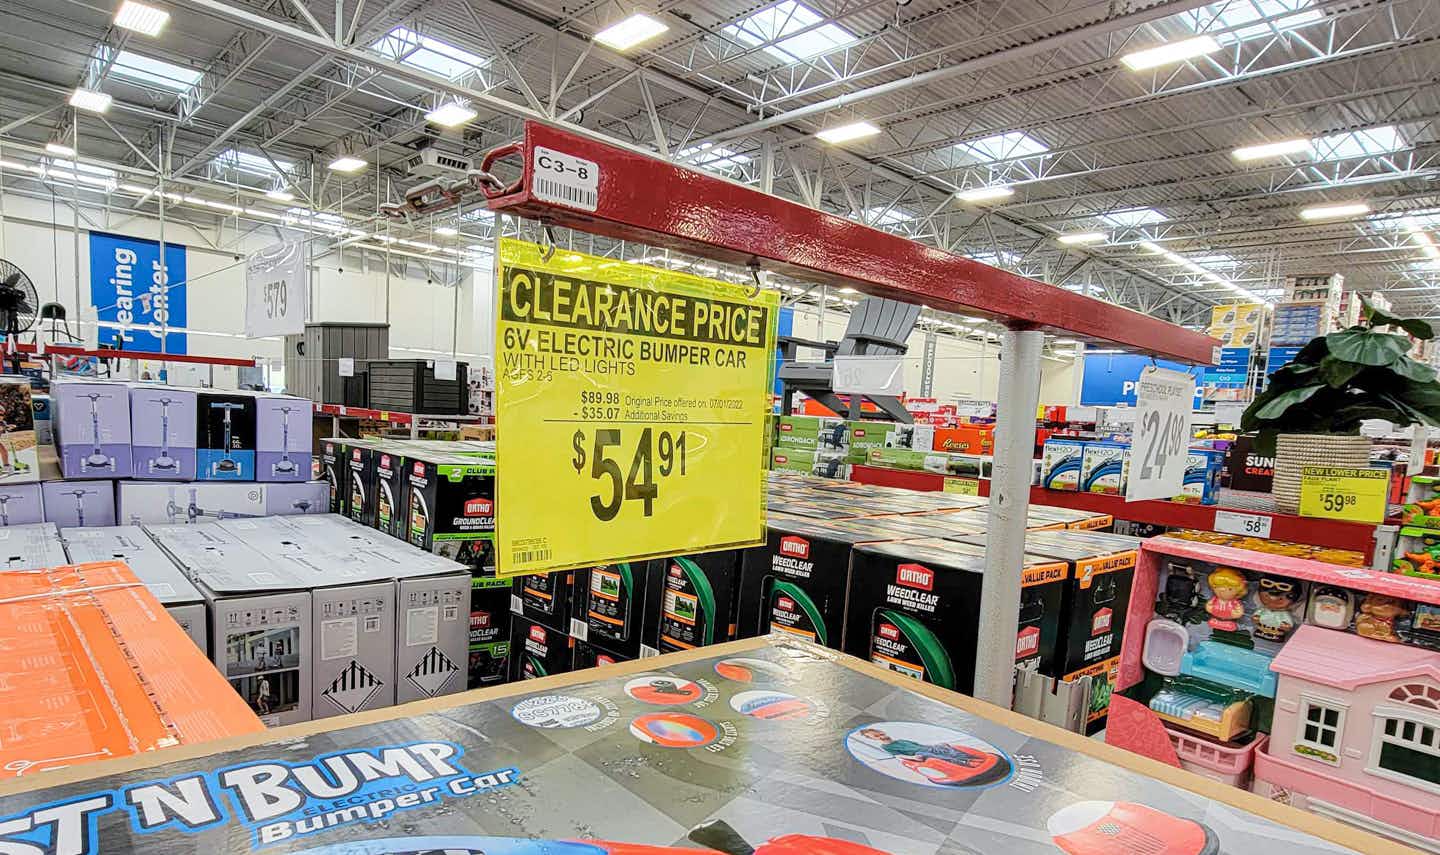 a clearance sign for a red kids bumper car for $54.91